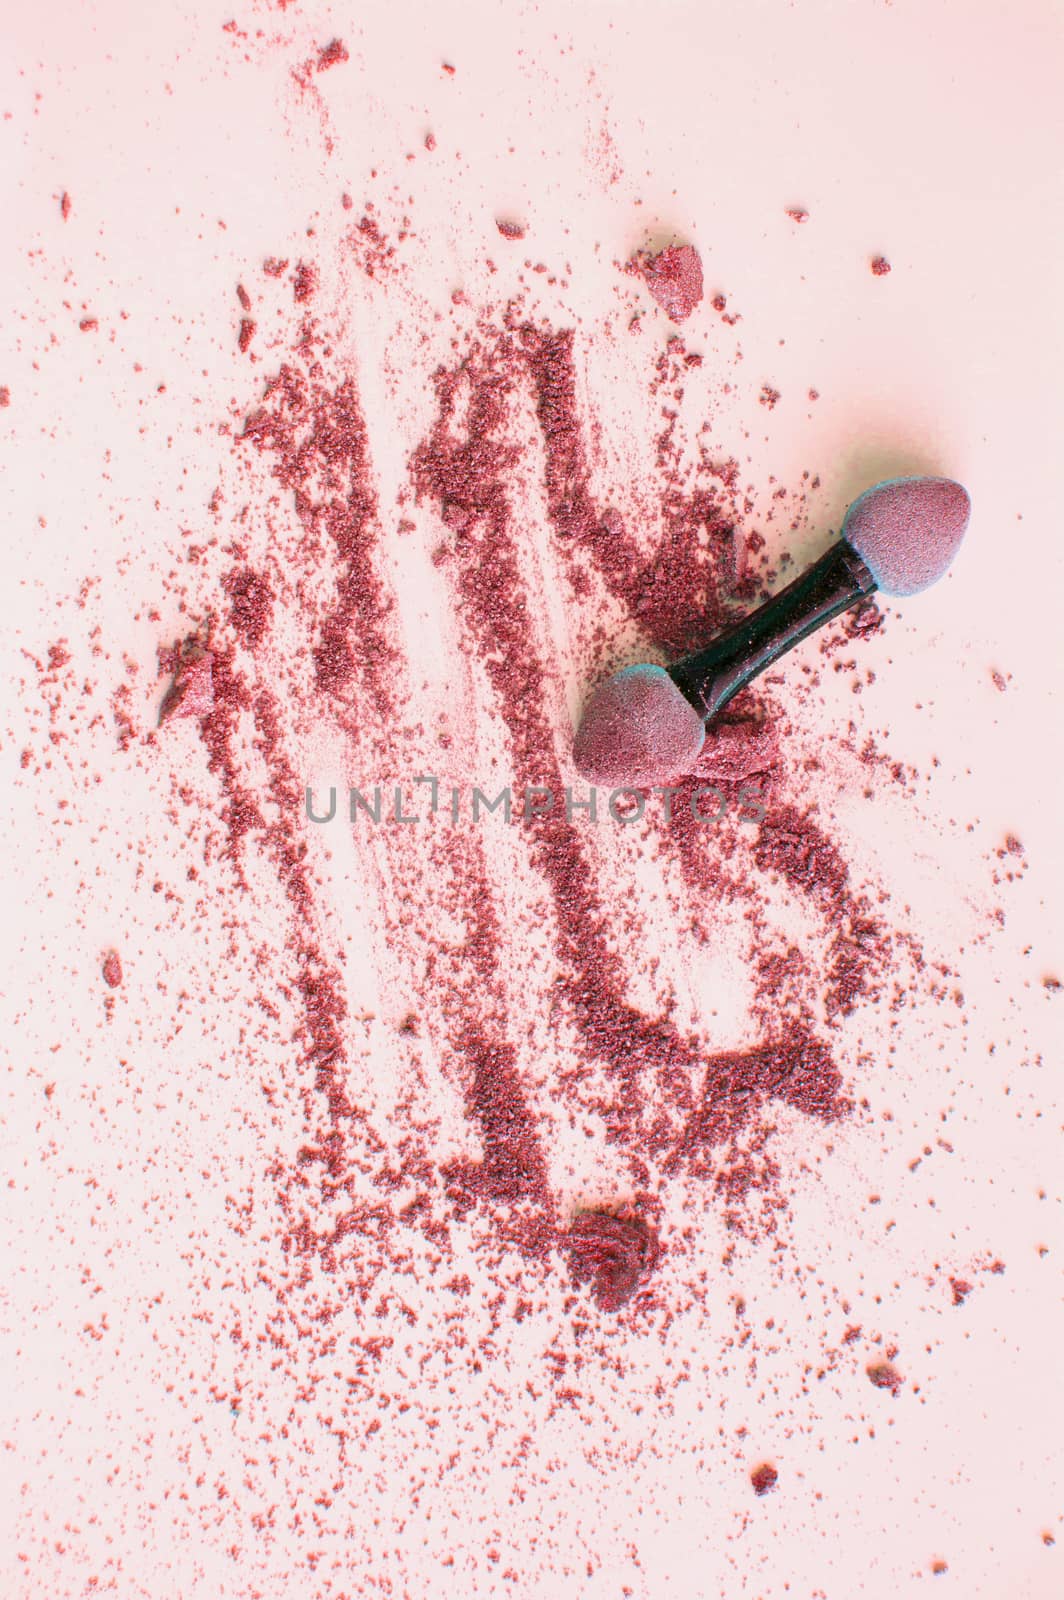 Scattered pink and coral eyeshadow with applicator, isolated on white background, beauty and makeup concept, vertical shot.